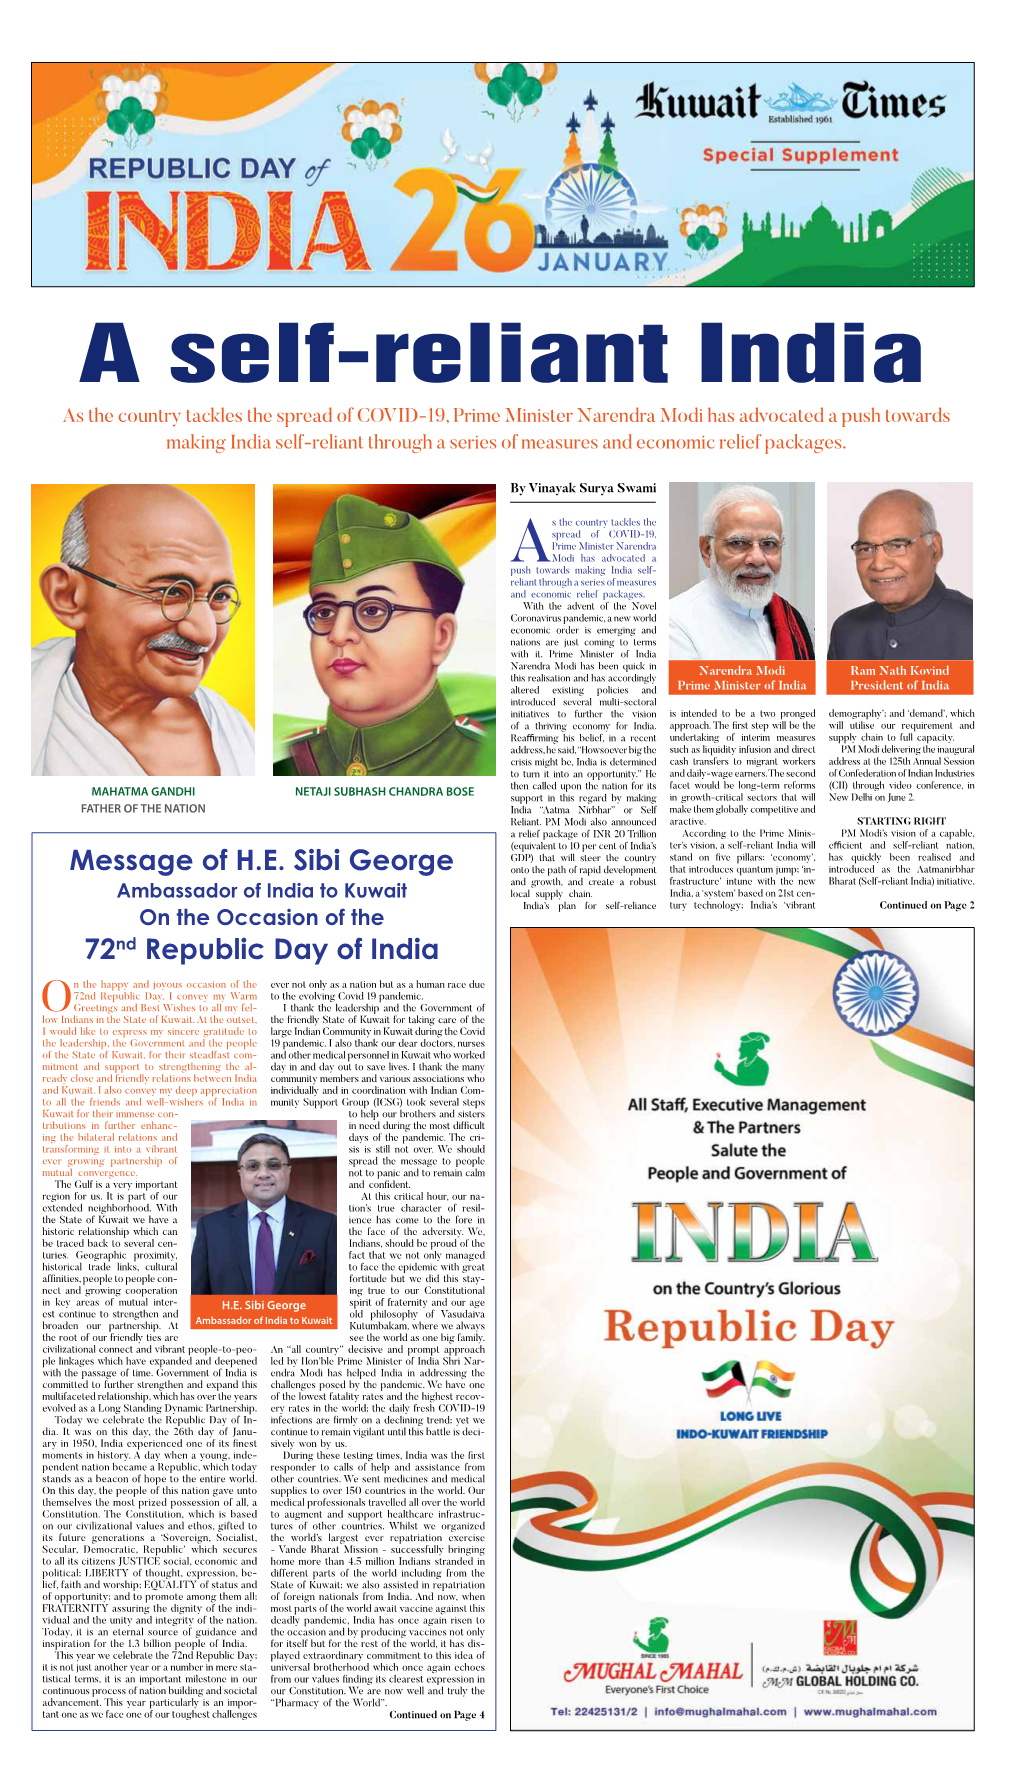 Message of H.E. Sibi George 72Nd Republic Day of India